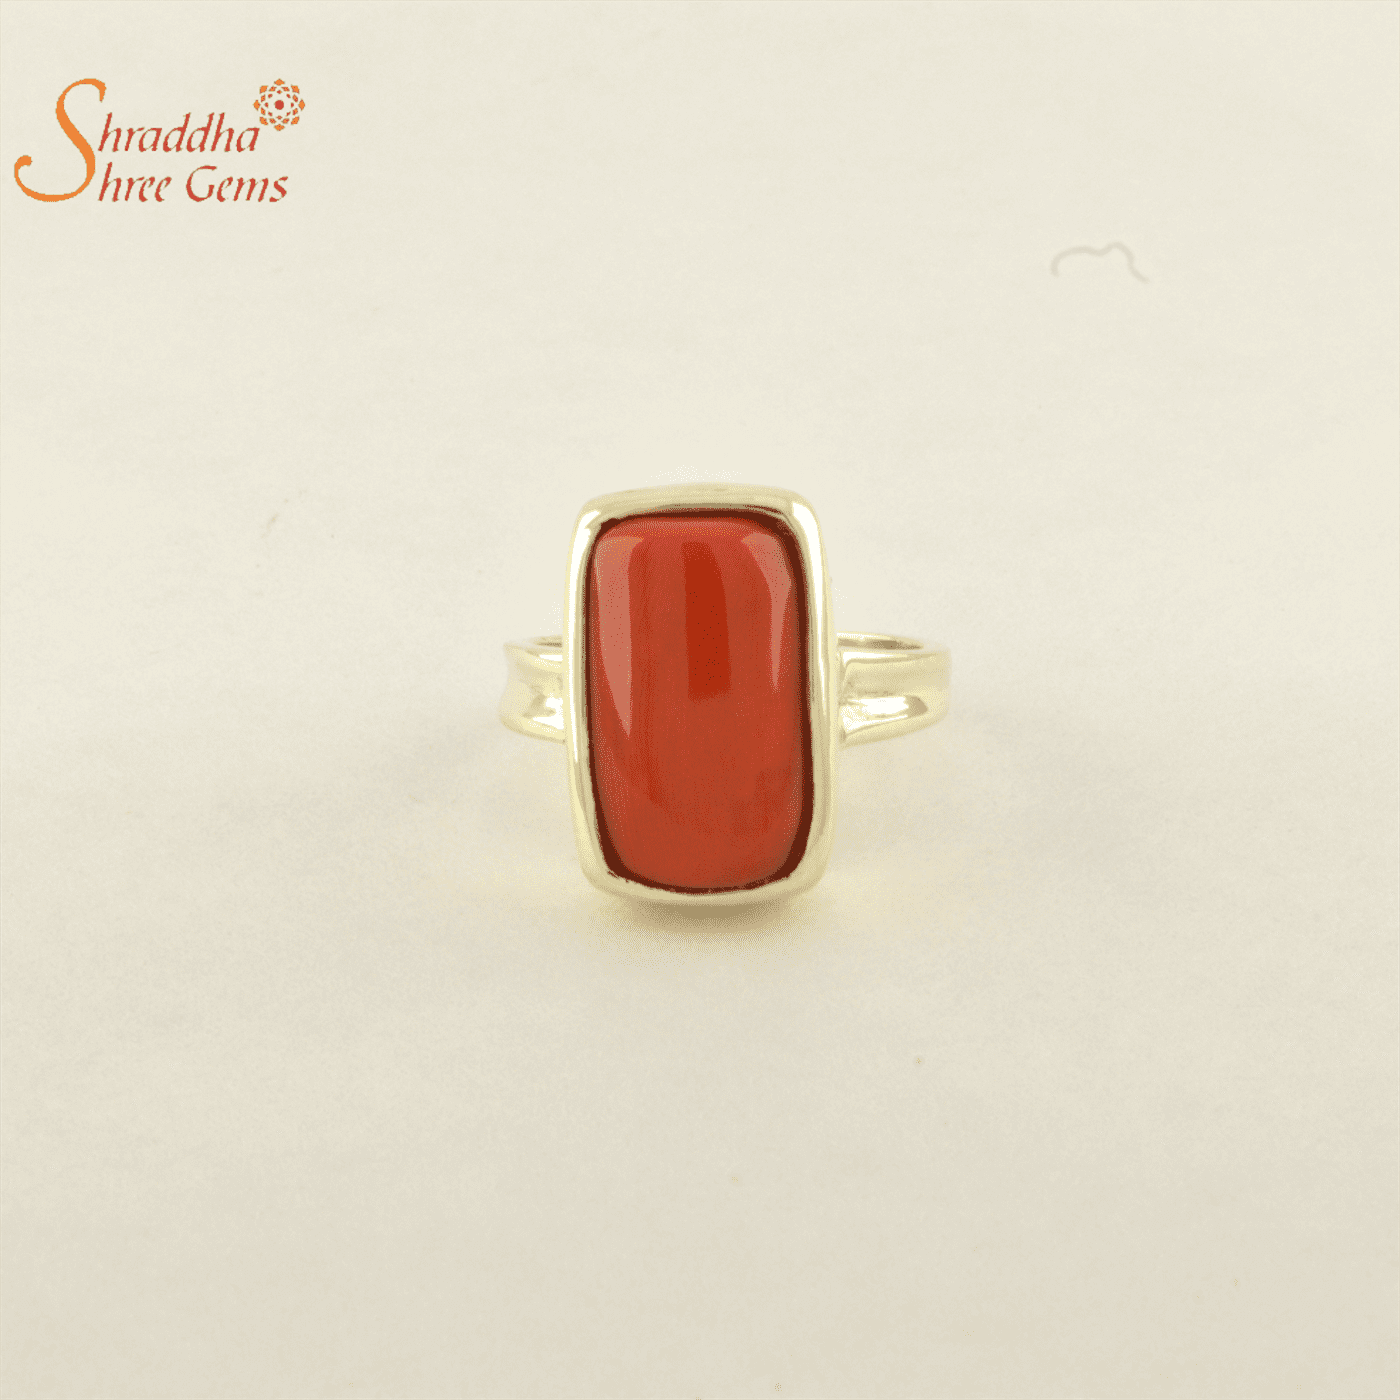 Natural Coral Ring,925 Sterling Silver Ring,Handmade Ring,Gift,All Sizes 3  to 14 | eBay